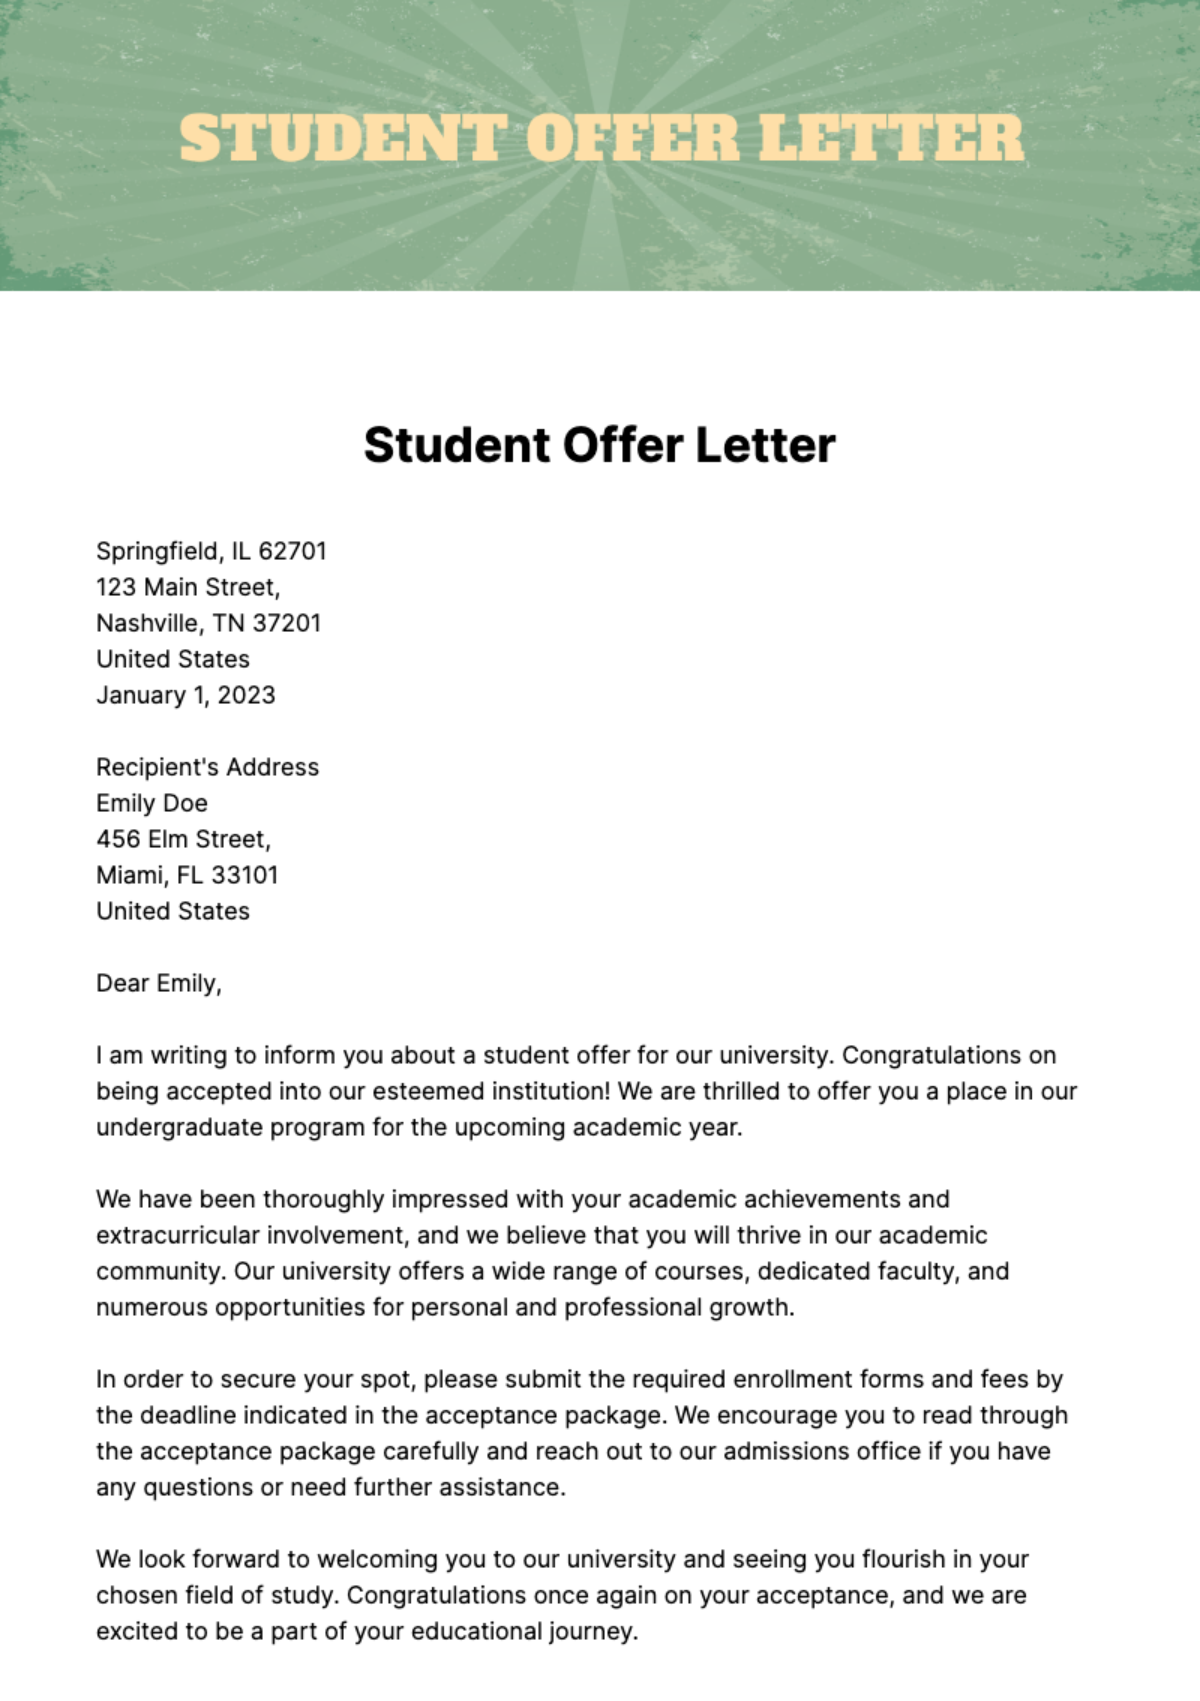 Student Offer Letter Template